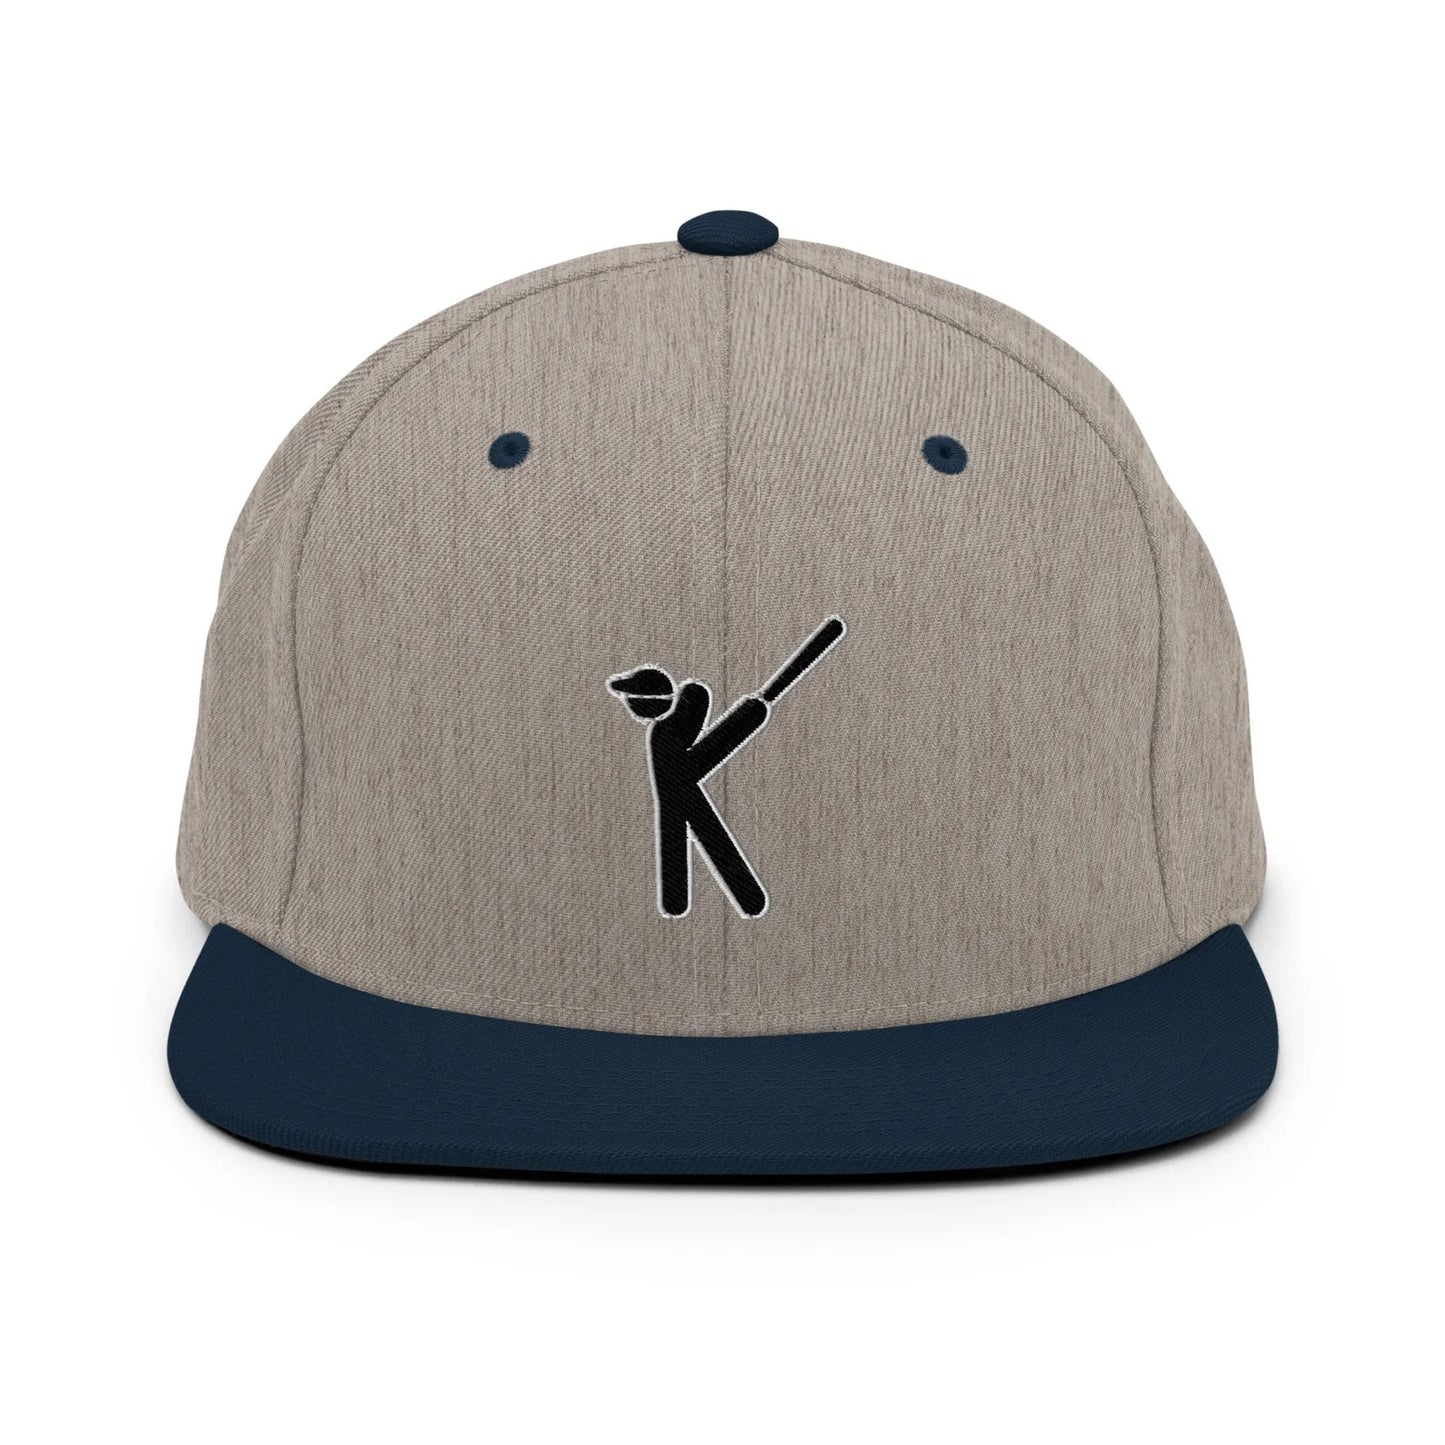 Kasabe ShowZone snapback hat in heather grey with navy brim and accents